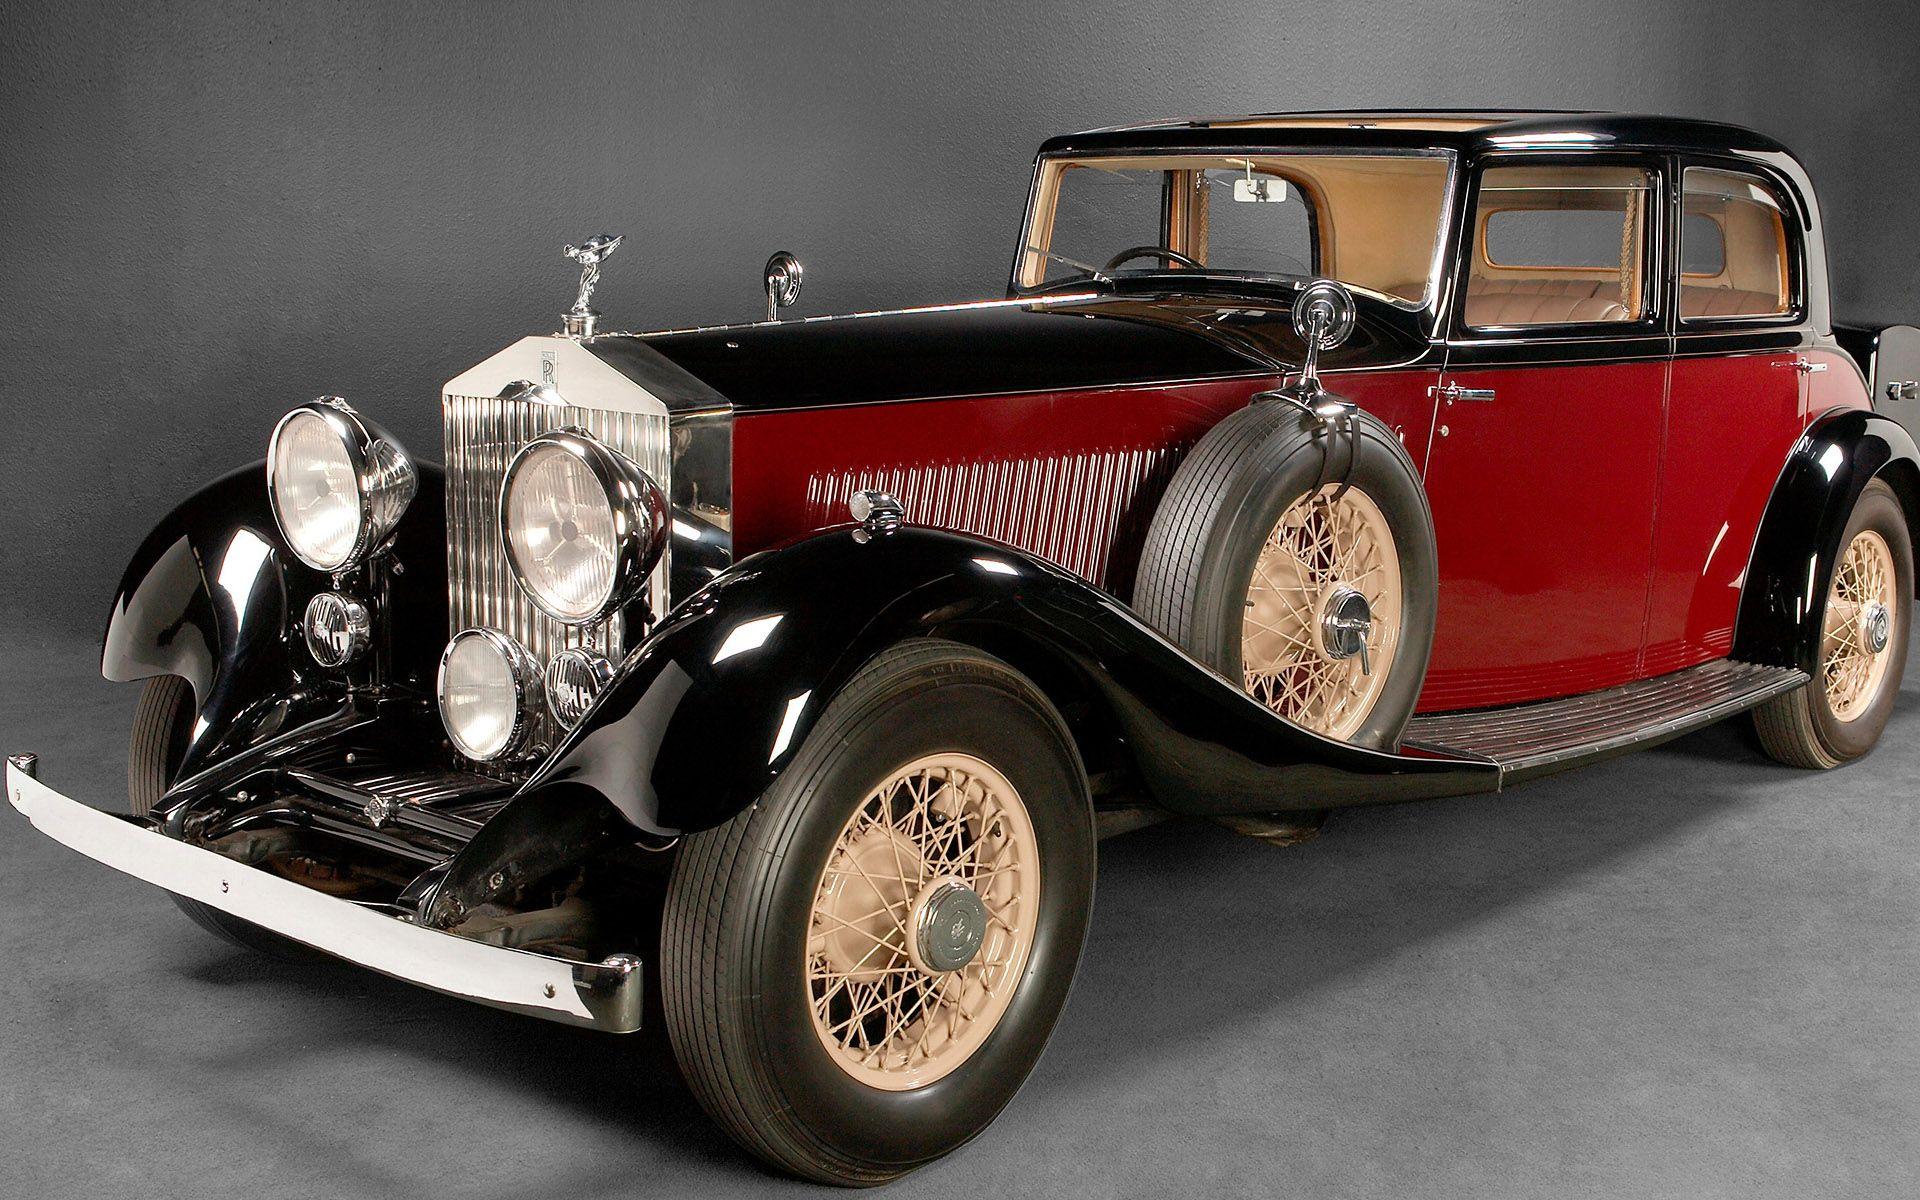 Oldest surviving Rolls Royce sells for more than 7 million